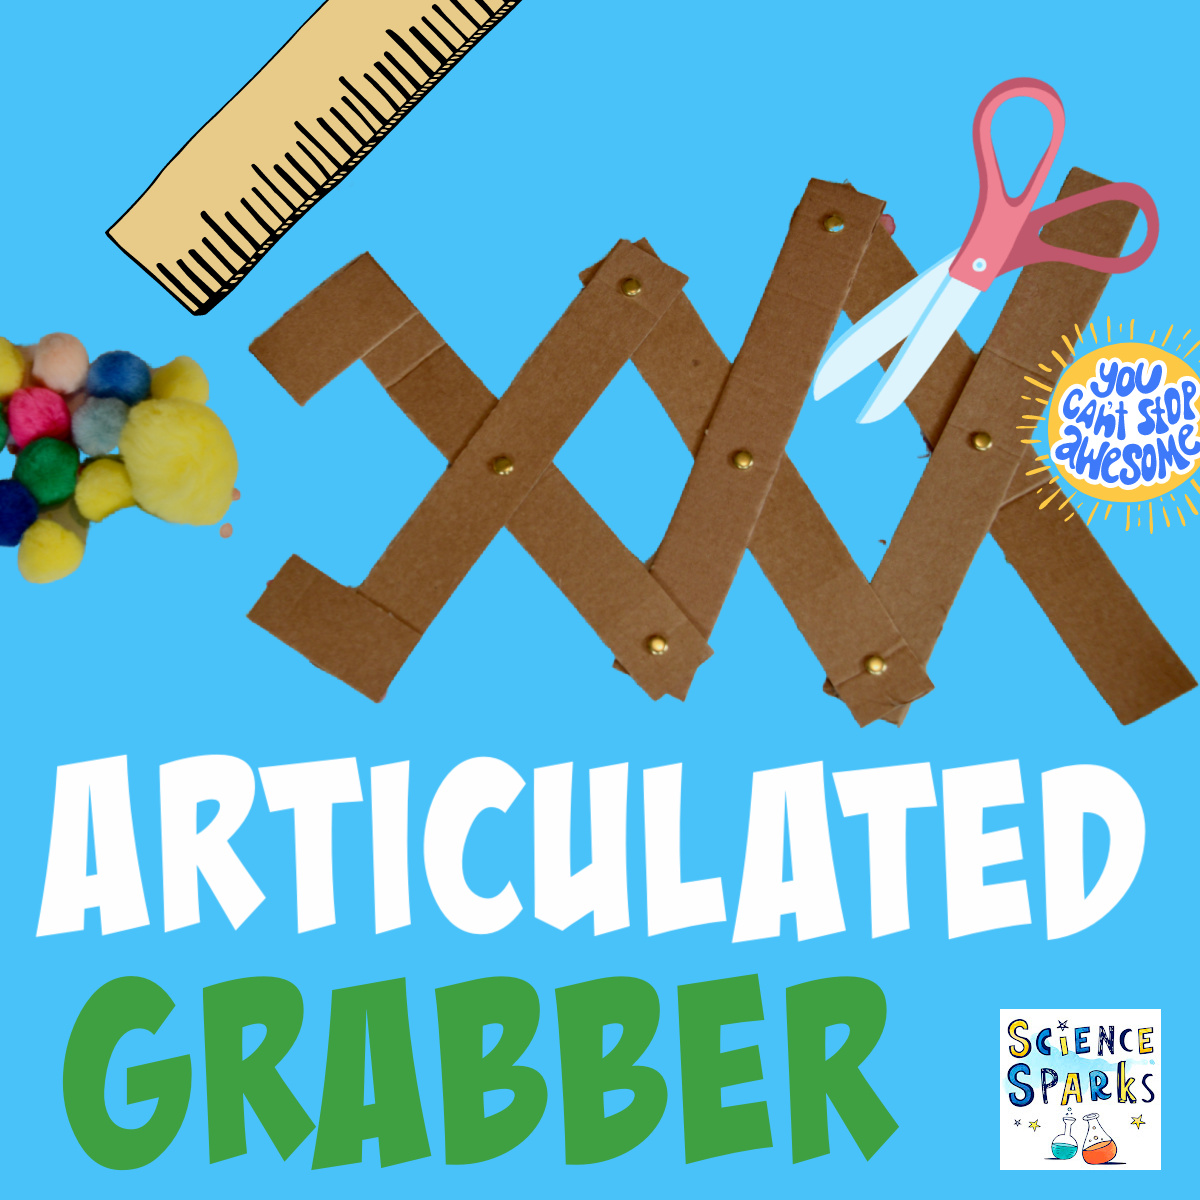 Image of an articulated grabber made from cardboard